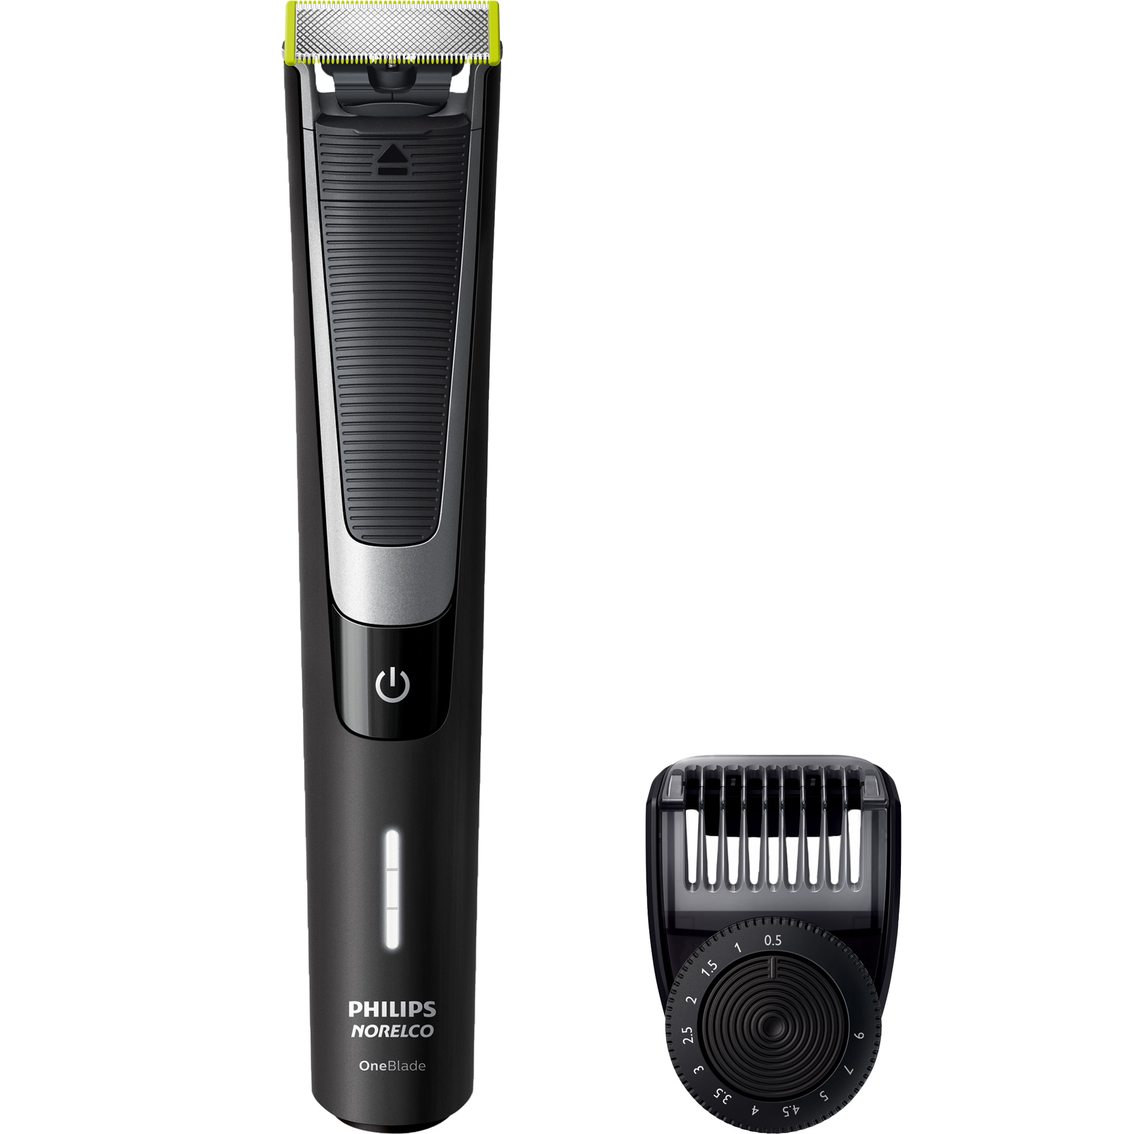 Philips Norelco OneBlade Pro Hybrid Electric Trimmer and Shaver - Image 2 of 2